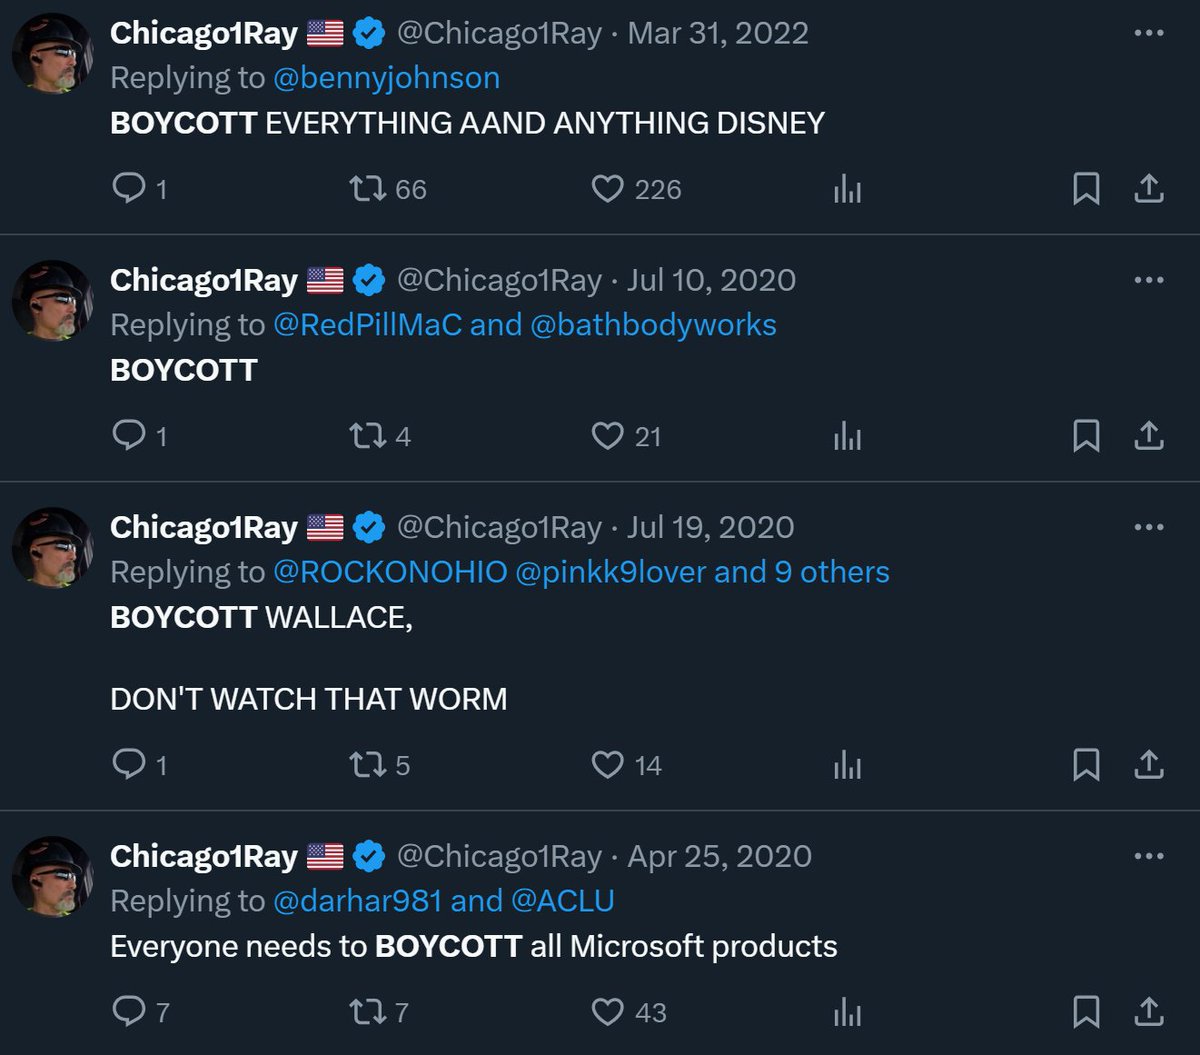 @Chicago1Ray @DavidTh10828482 @FoxNews @foxnewspolitics @JesseBWatters Come on dude. You deleted posts. You have a clear history of crying for a boycott on every imaginable thing.